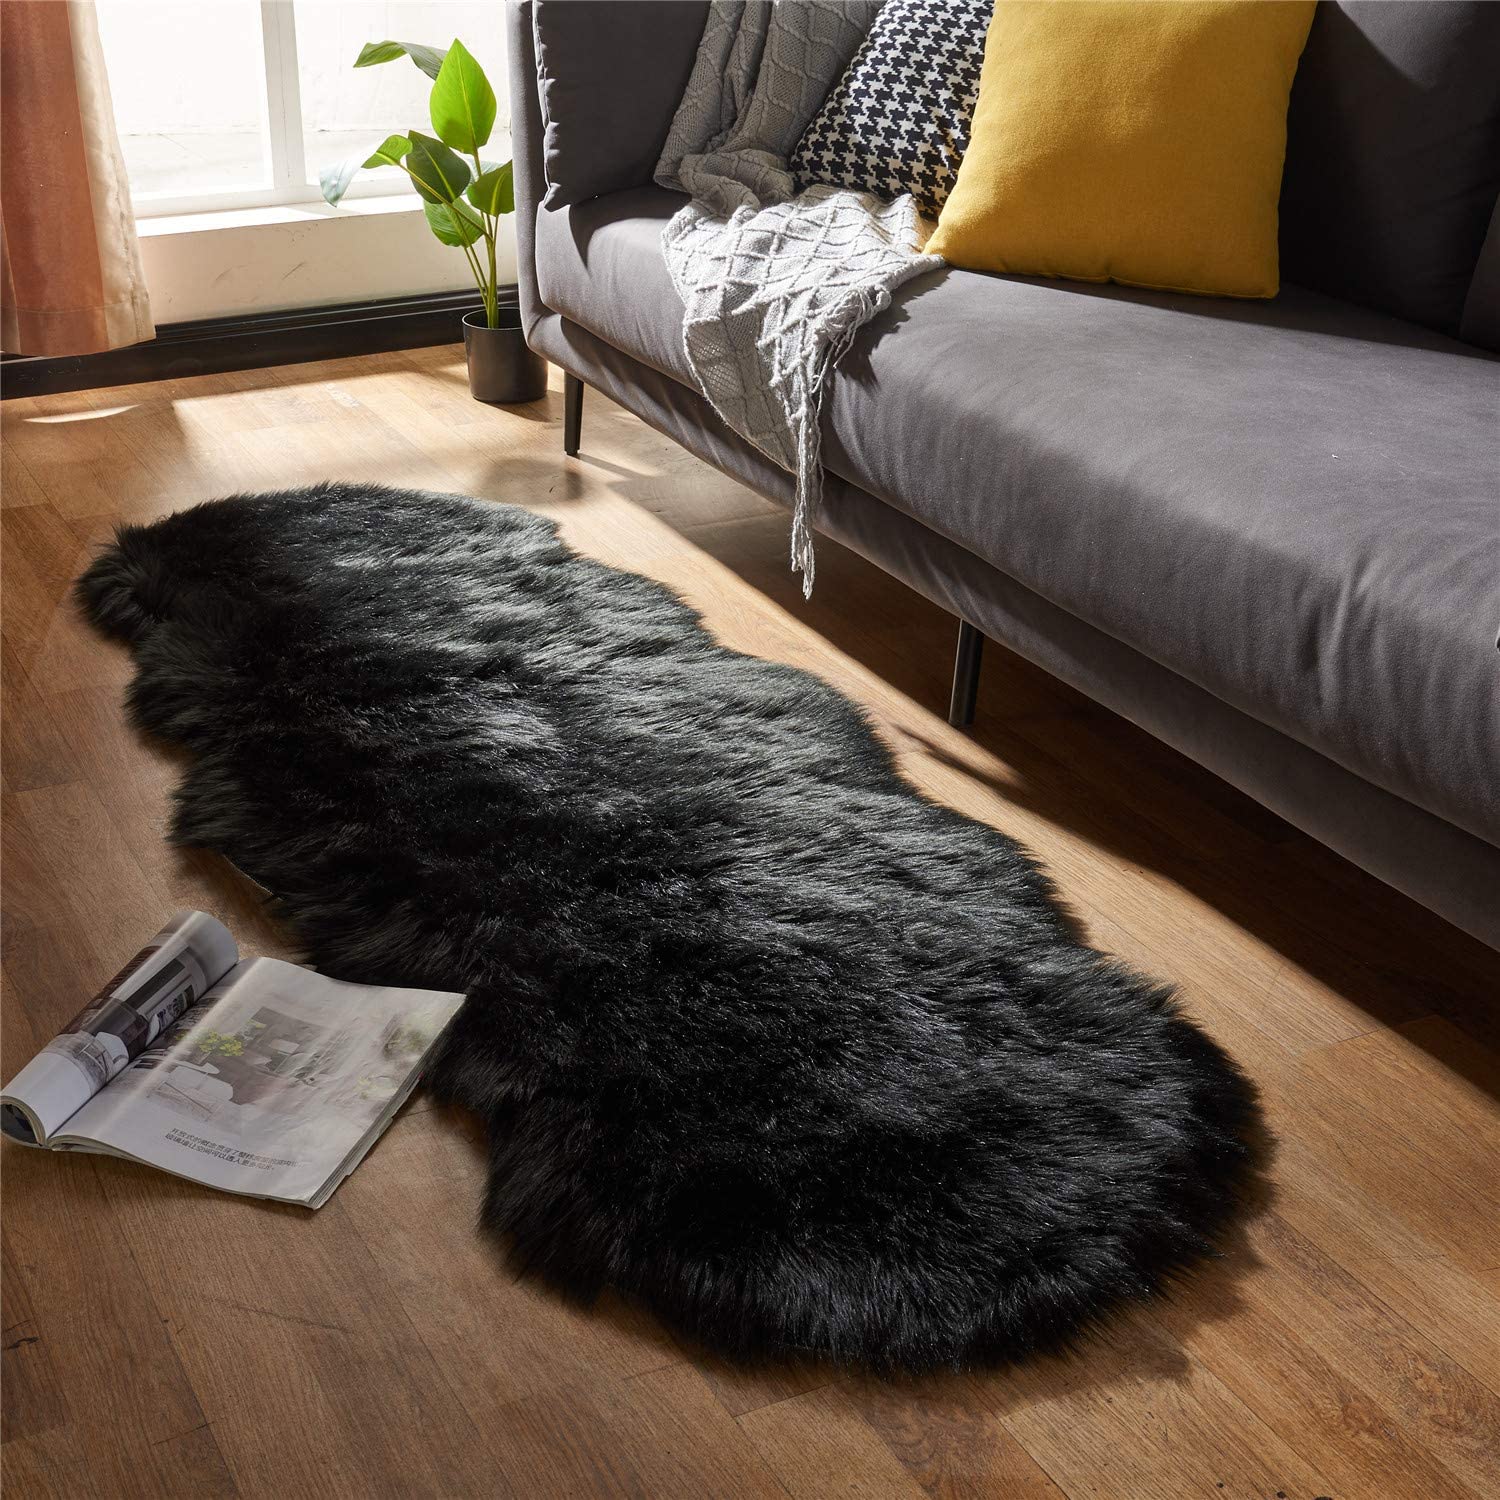 EasyJoy Ultra Soft Fluffy Rugs Faux Fur Rug Chair Cover Seat Pad Fuzzy Area Rug for Bedroom Floor Sofa Living Room